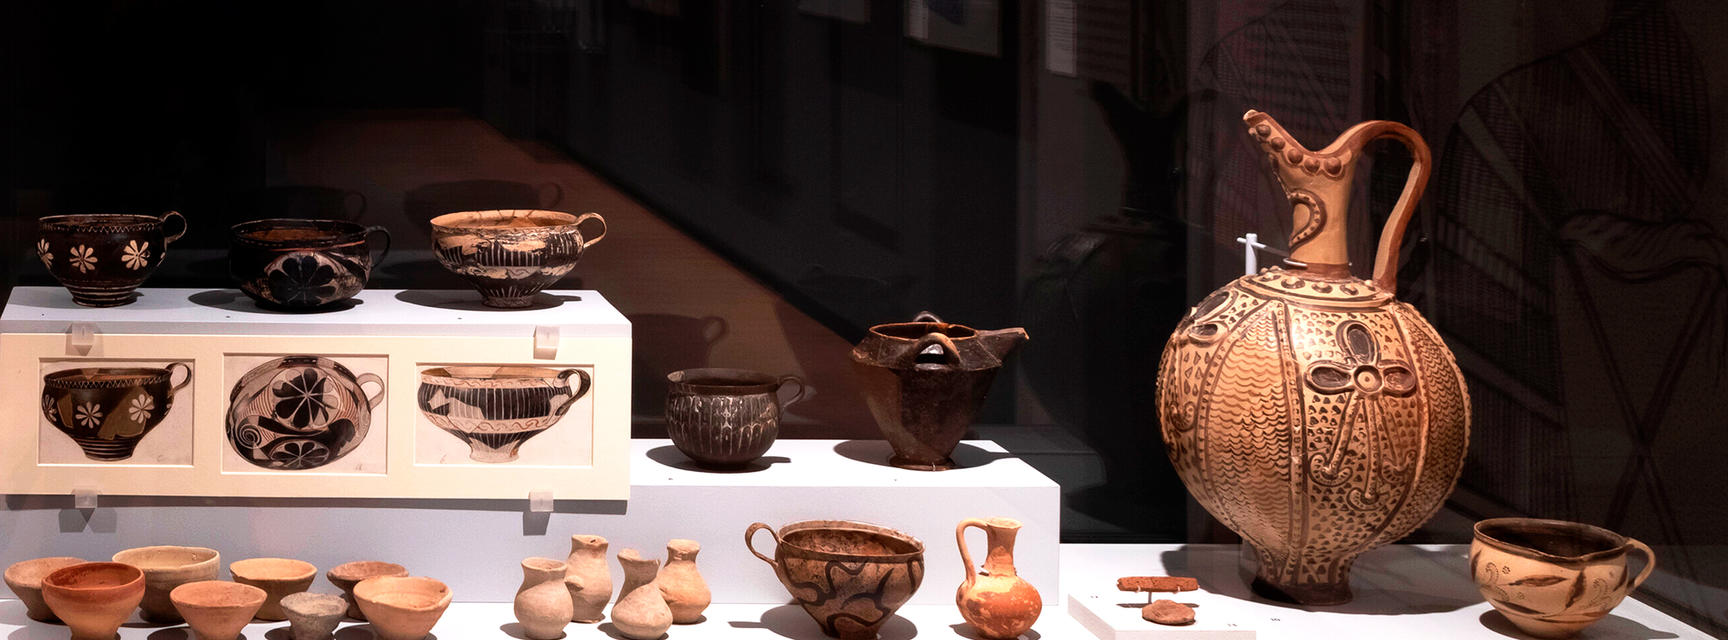 Dining display of ancient Minoan cups, bowls and jugs in the Labyrinth Knossos exhibition